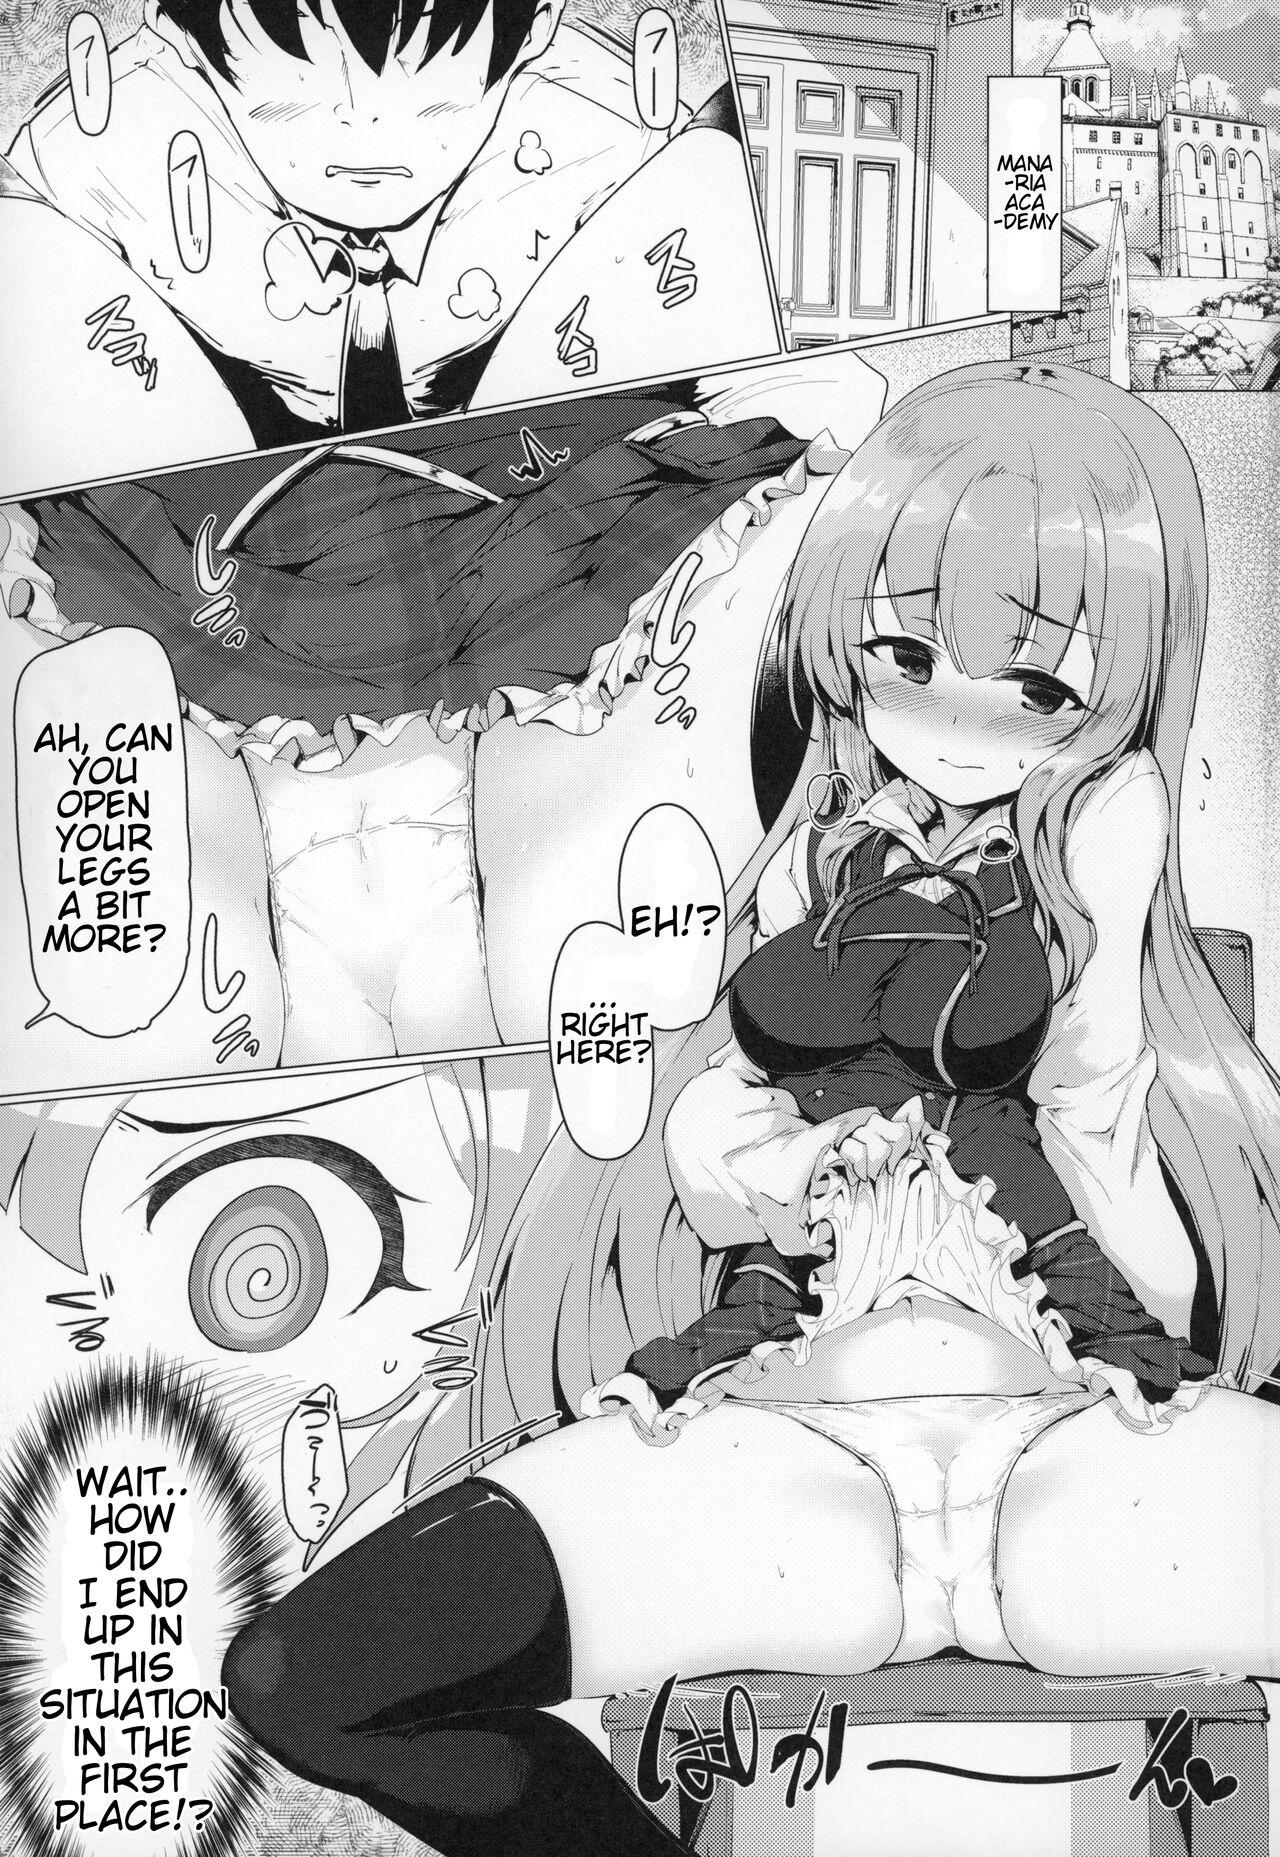 Doggystyle There's No Way An Ecchi Event Will Happen Between Me and the Princess of Manaria Kingdom! - Manaria friends Teenage Sex - Page 4